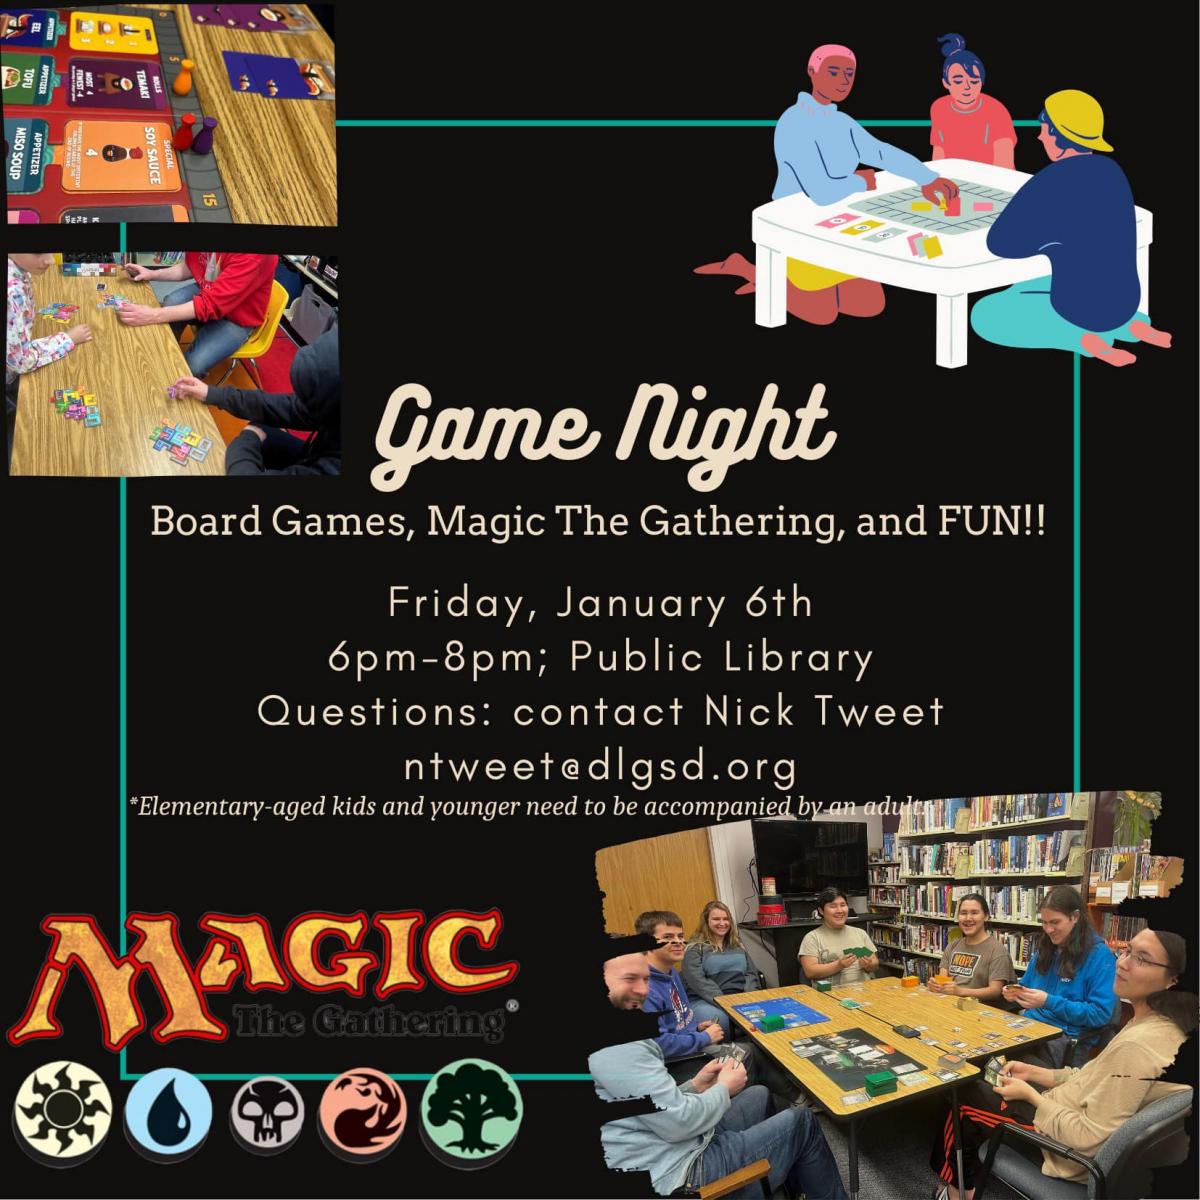 Game Night at the Library